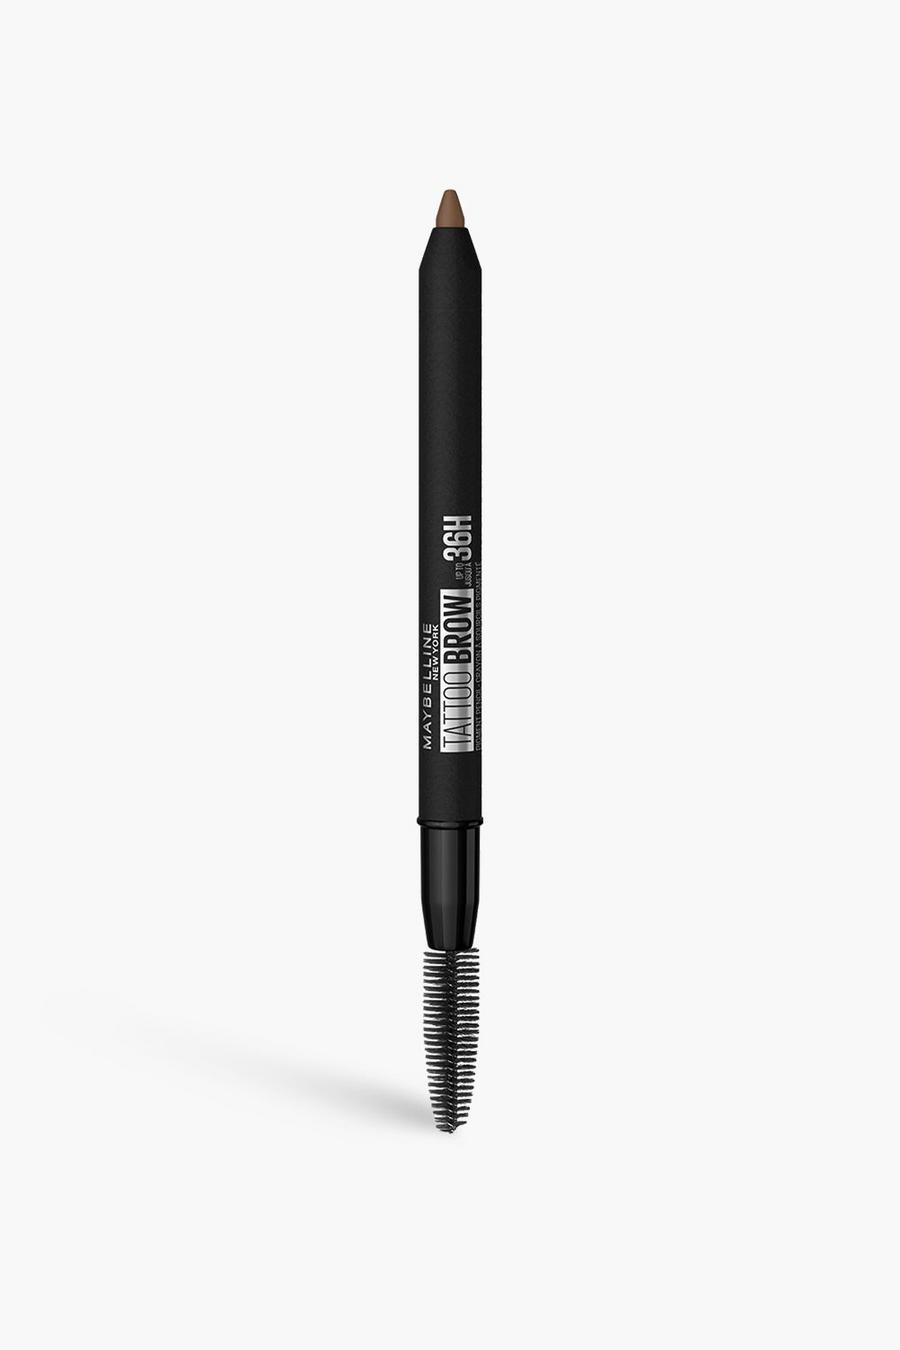 Maybelline Tattoo Brow Semi Perm Soft Brown 3, Marrone image number 1